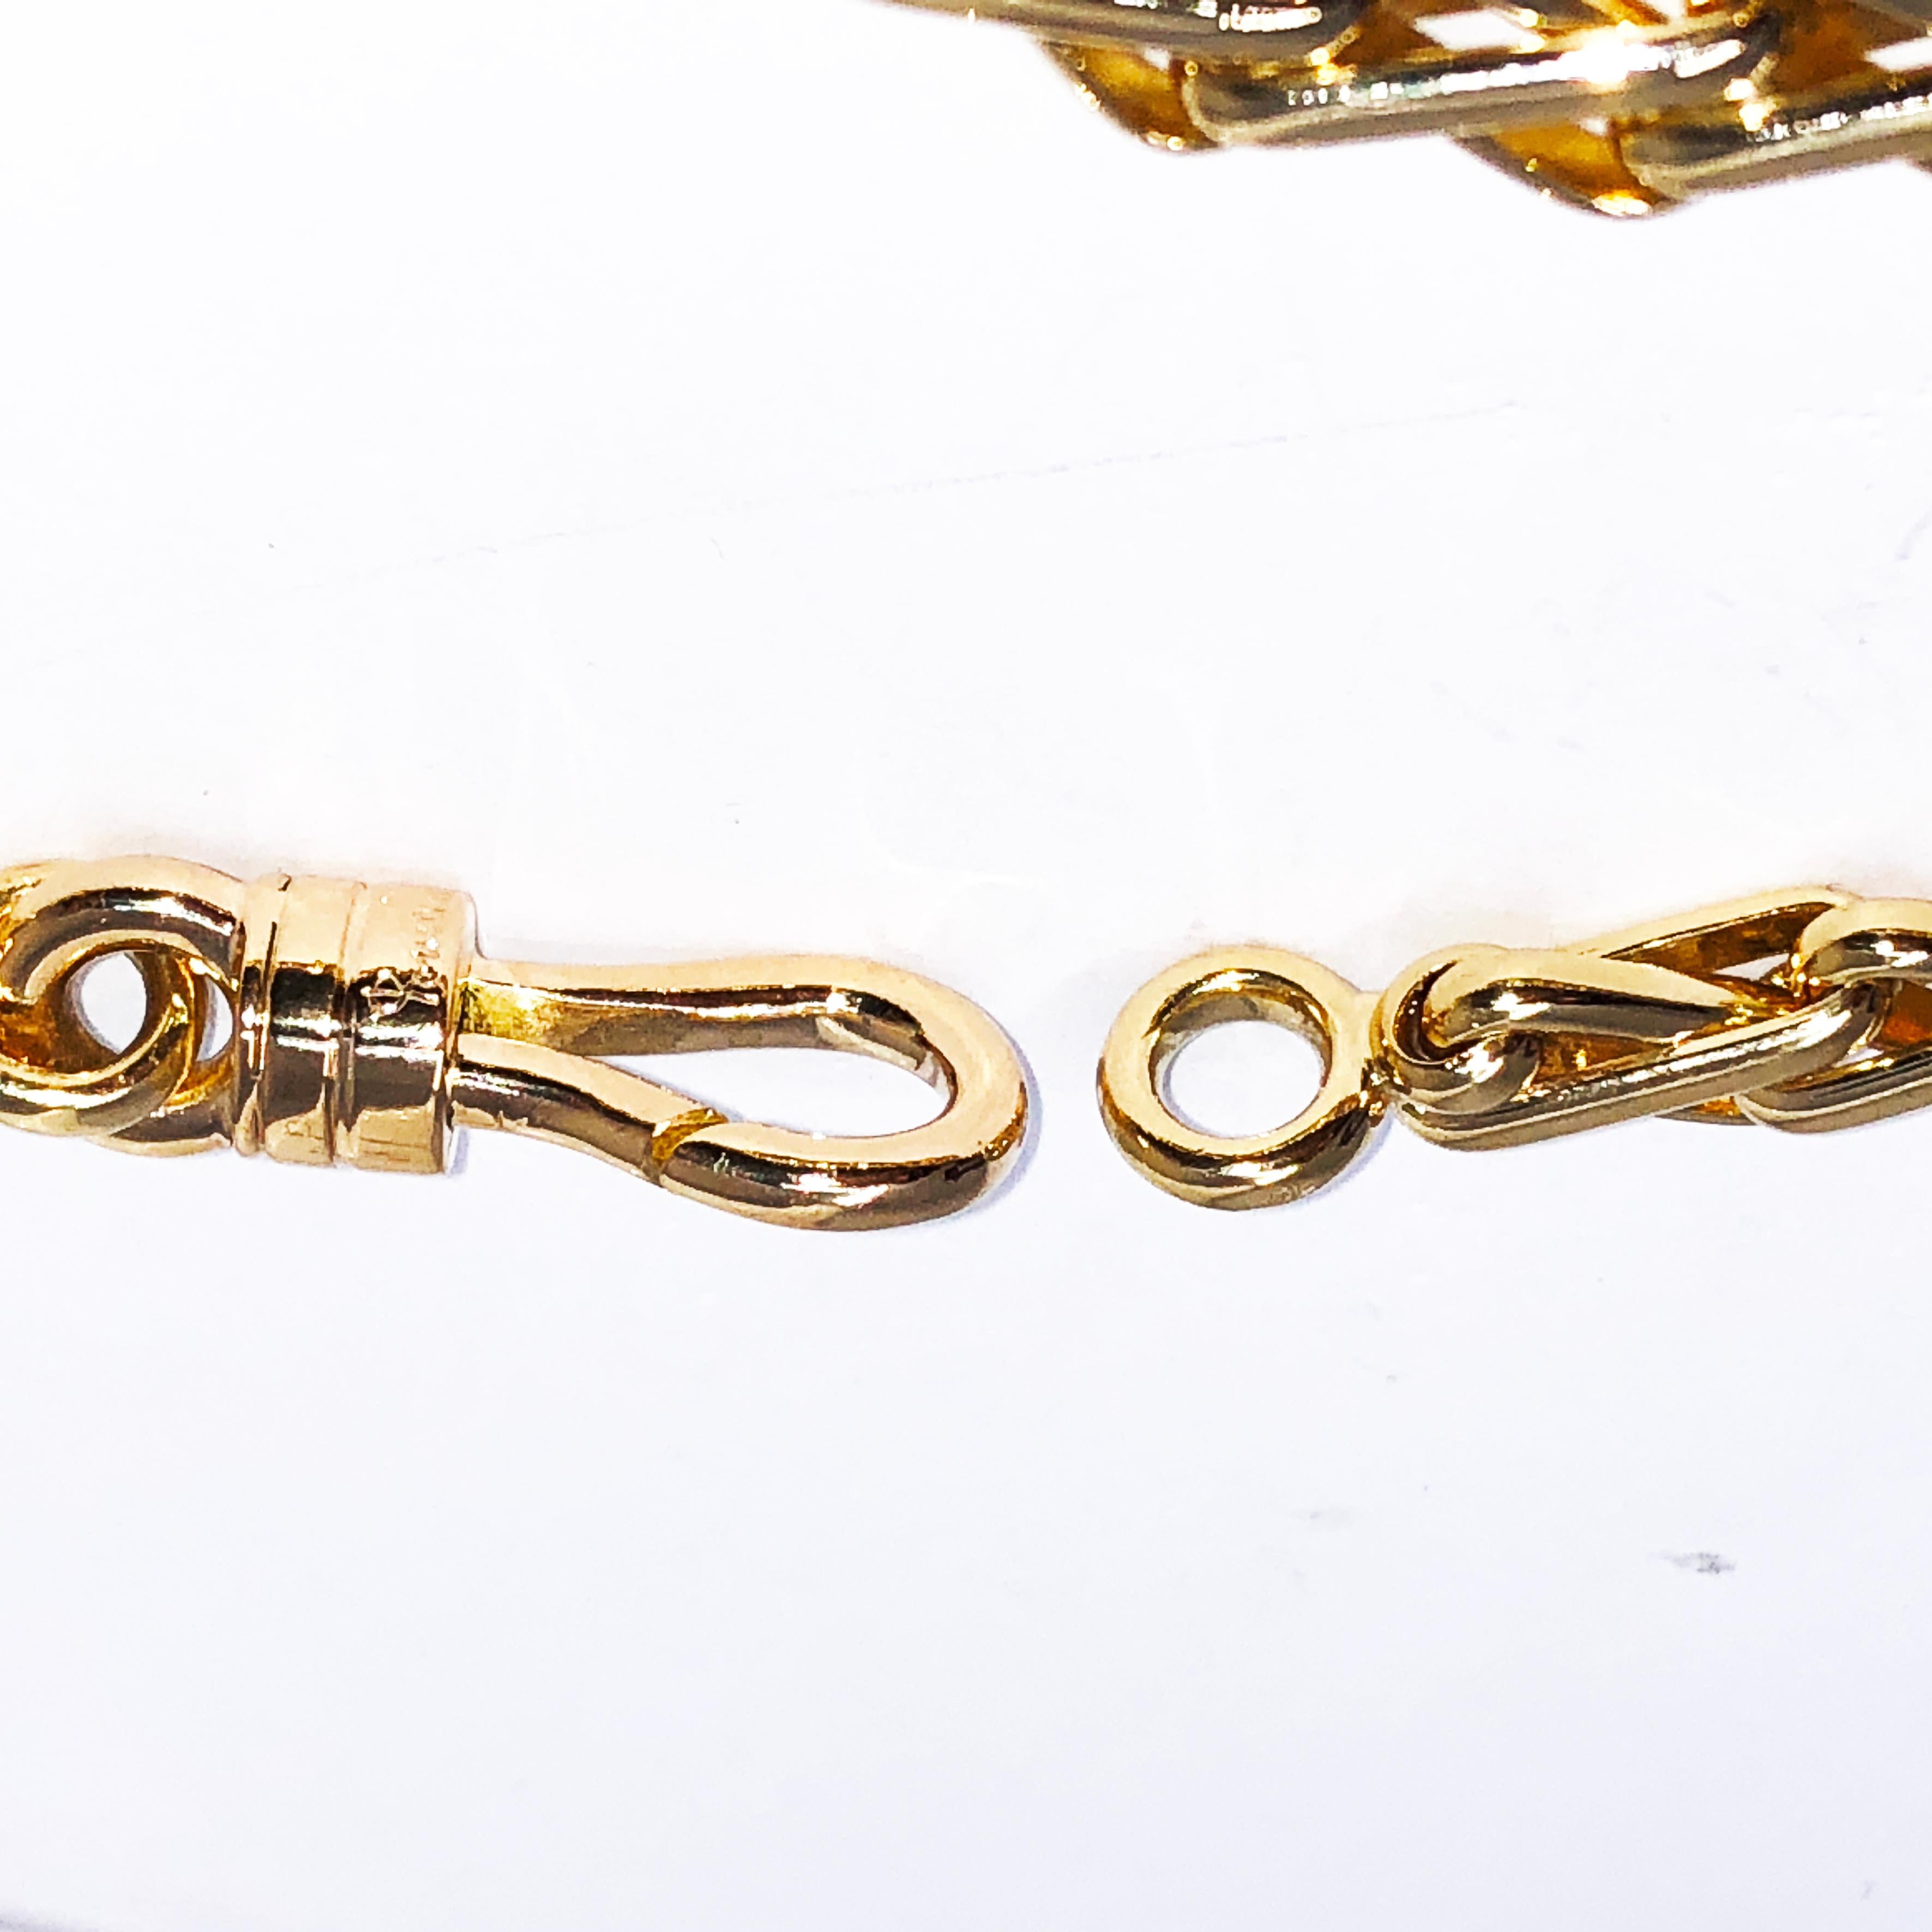 Women's or Men's Original 1980 One-of-a-Kind Pomellato 18K Solid Yellow Gold Long Chain Necklace